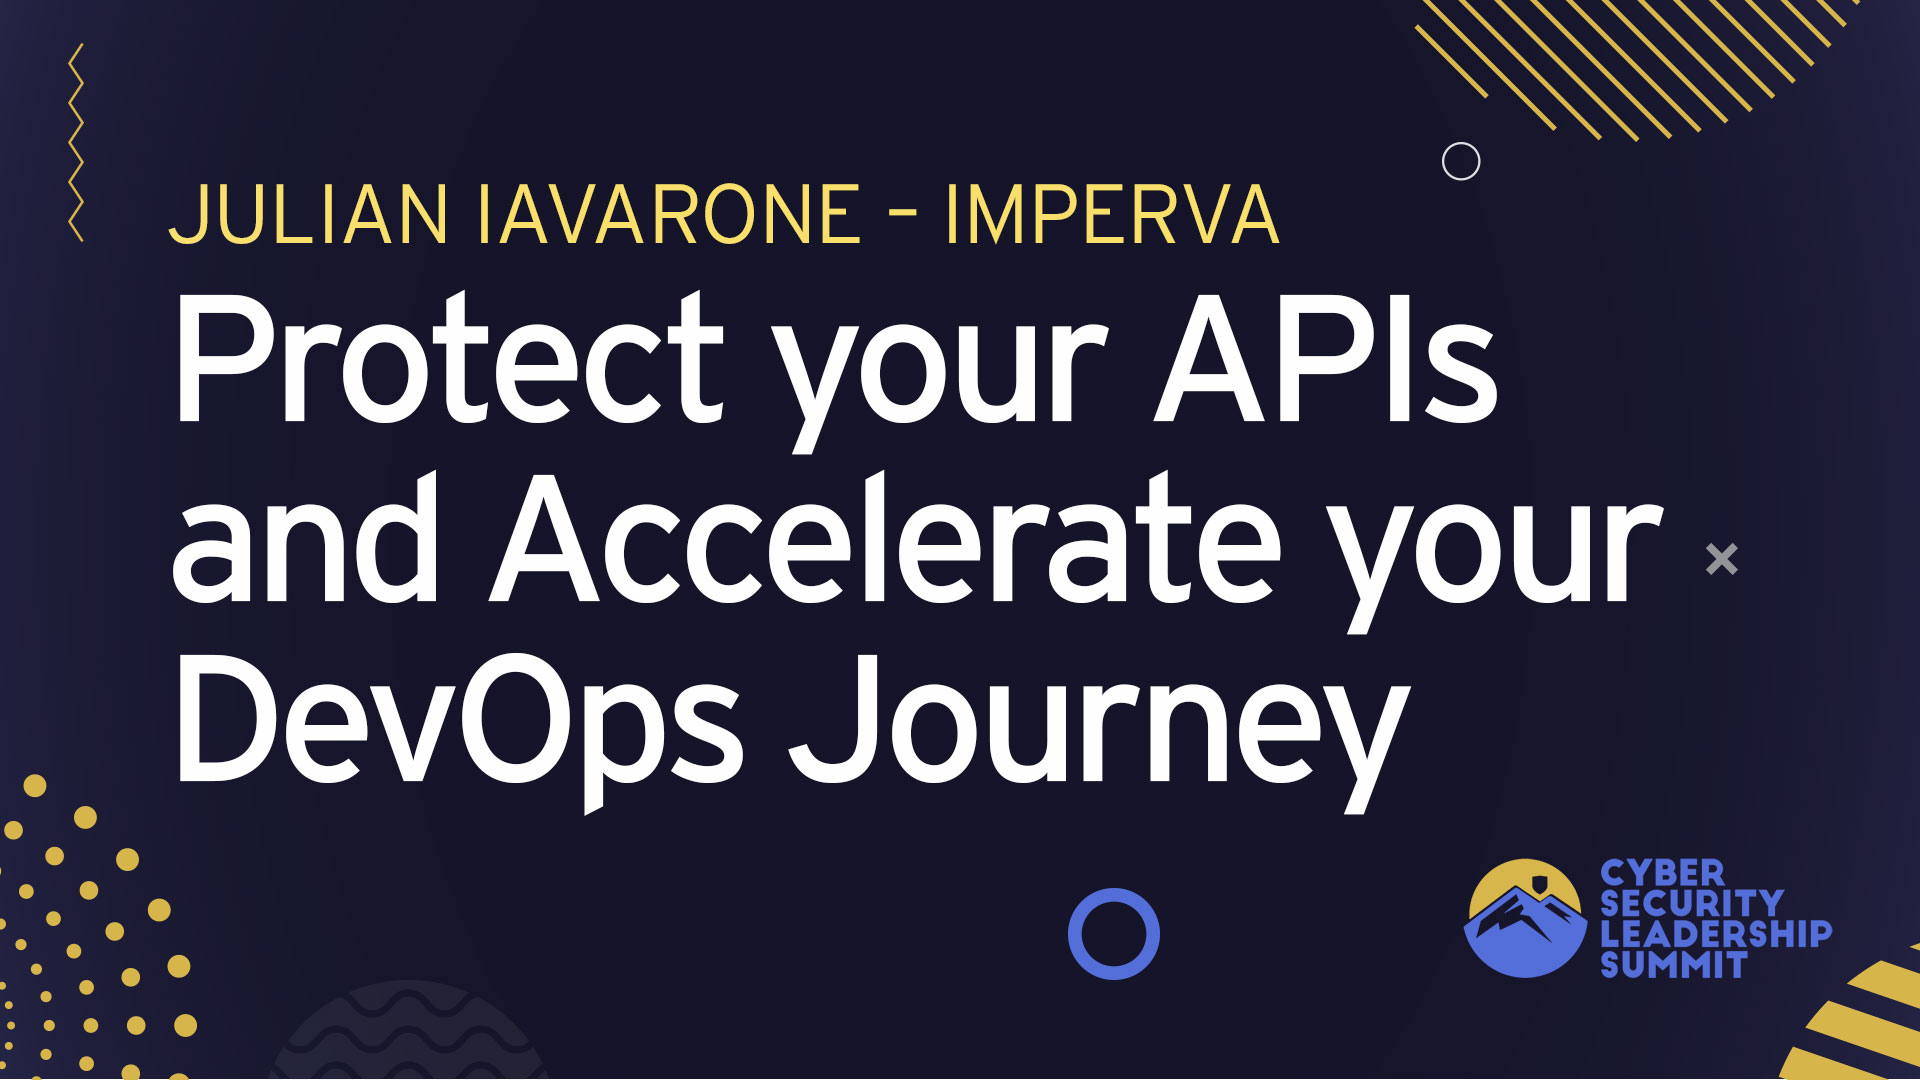 Best Practices to Protect your APIs and Accelerate your DevOps Journey.